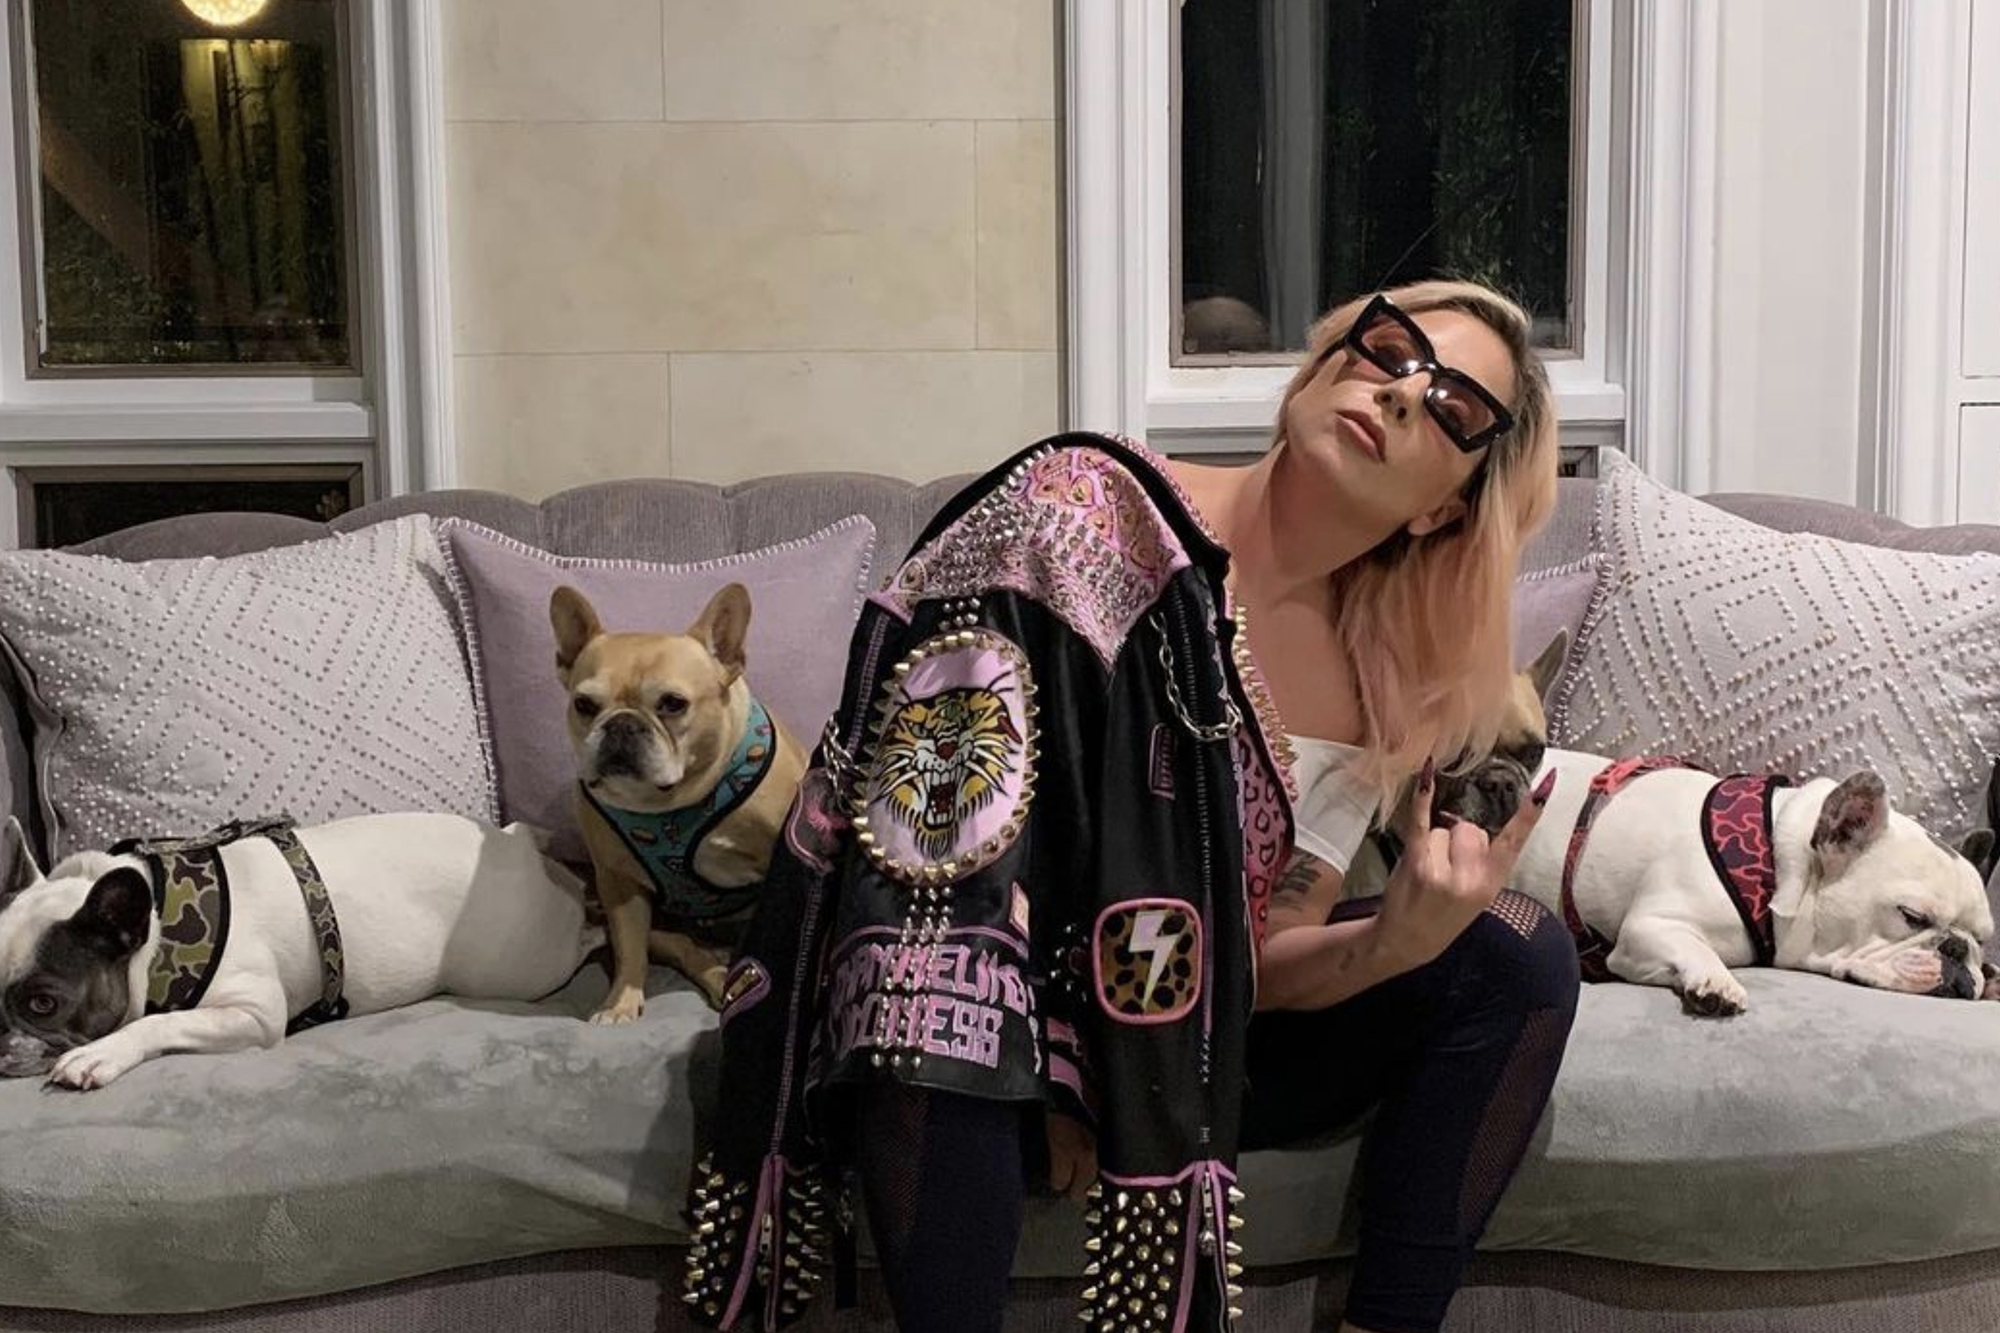 Lady Gaga offered up to a $500,000 reward for the return of the dogs, following the shooting and dognapping.